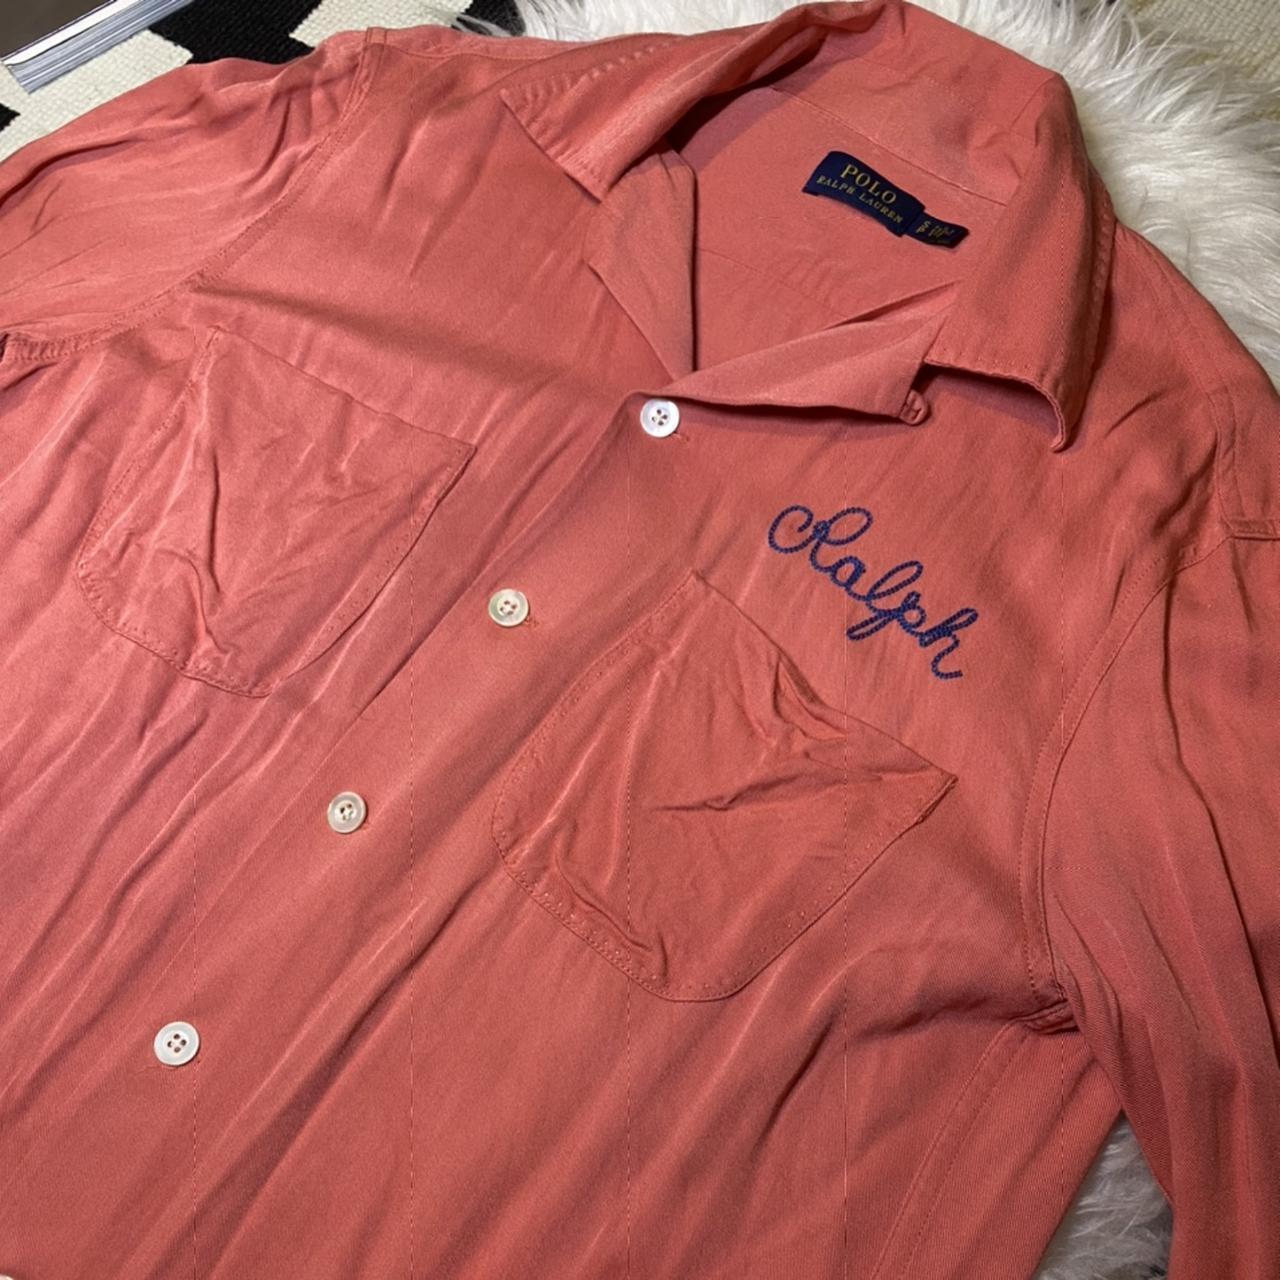 Polo Ralph Lauren The Old Montauk Highway Coral